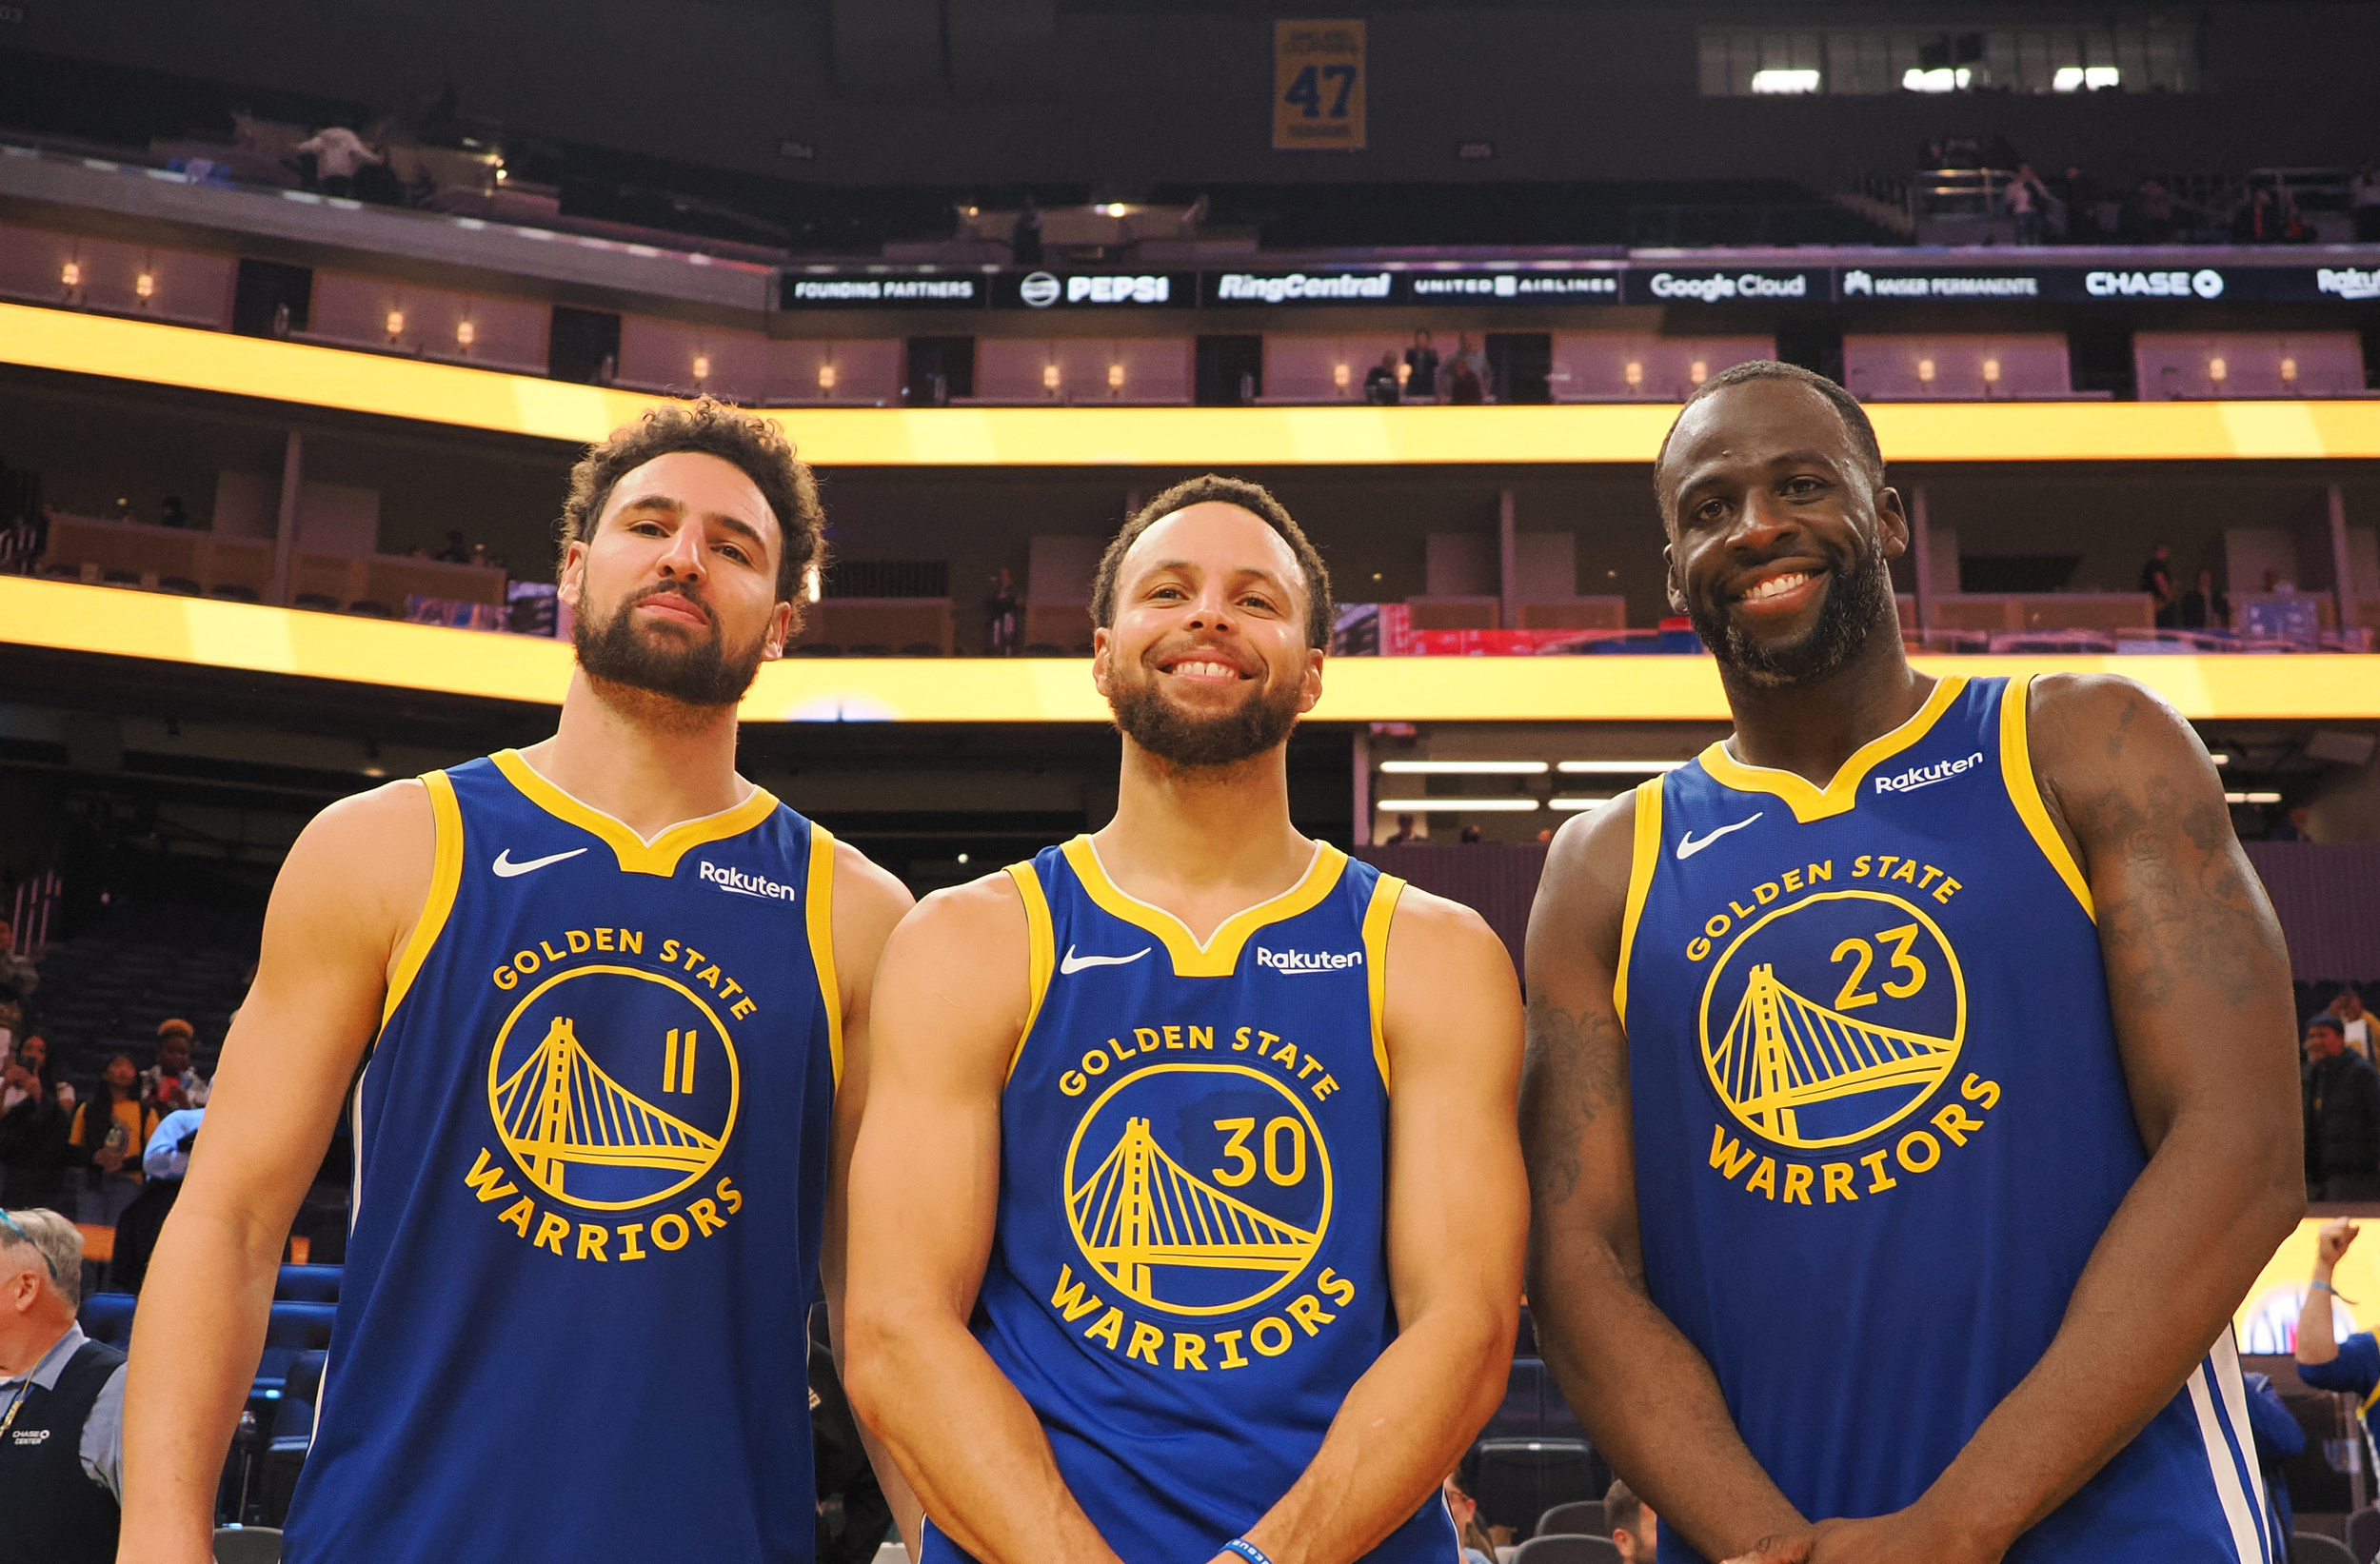 emmanuel acho may have predicted the fate of the warriors' big three